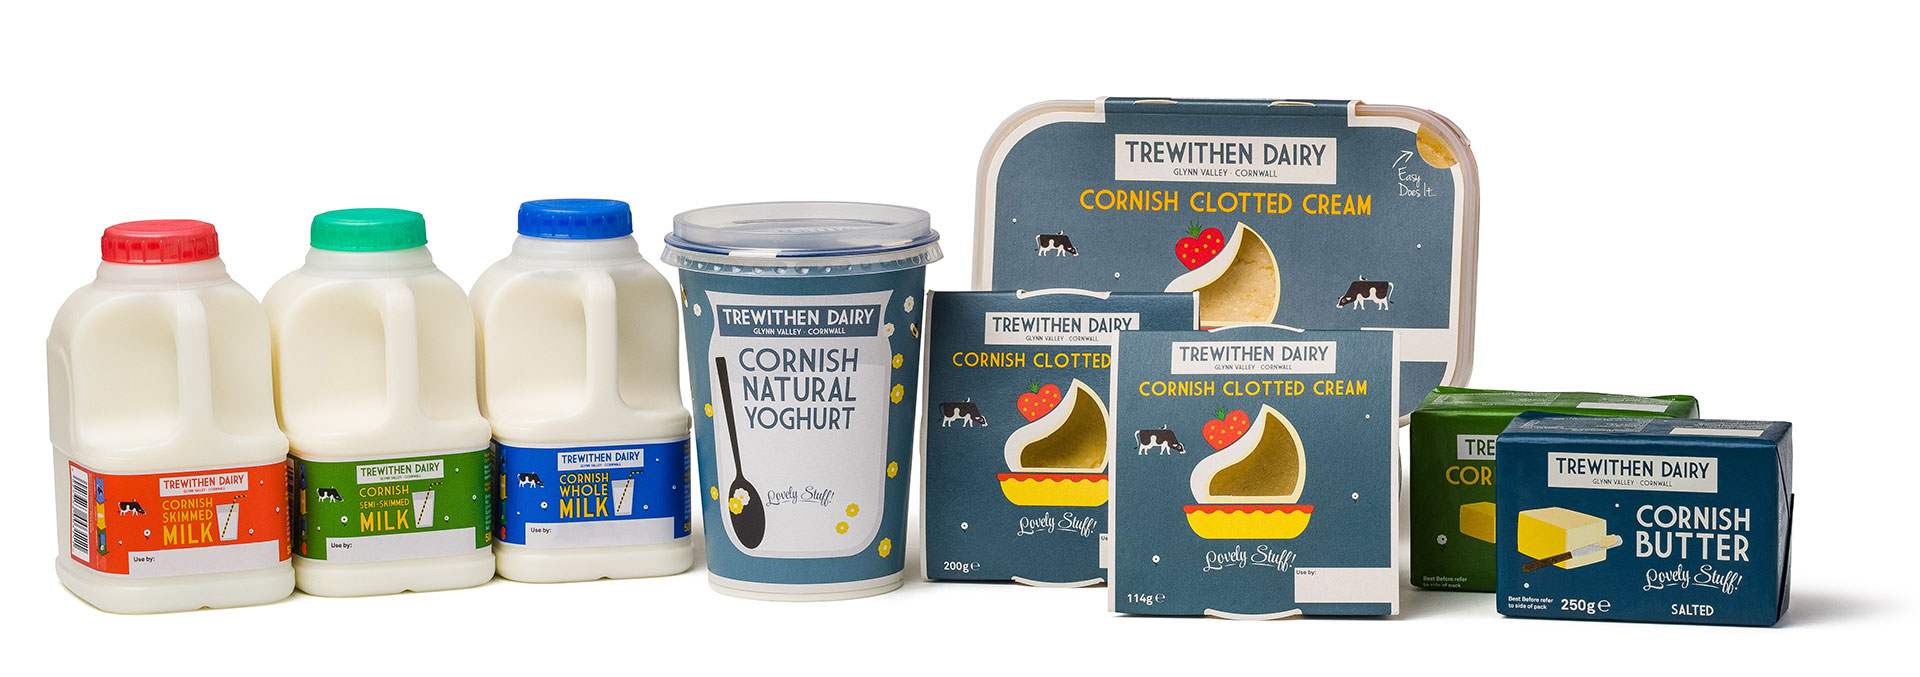 Trewithen Dairy product range